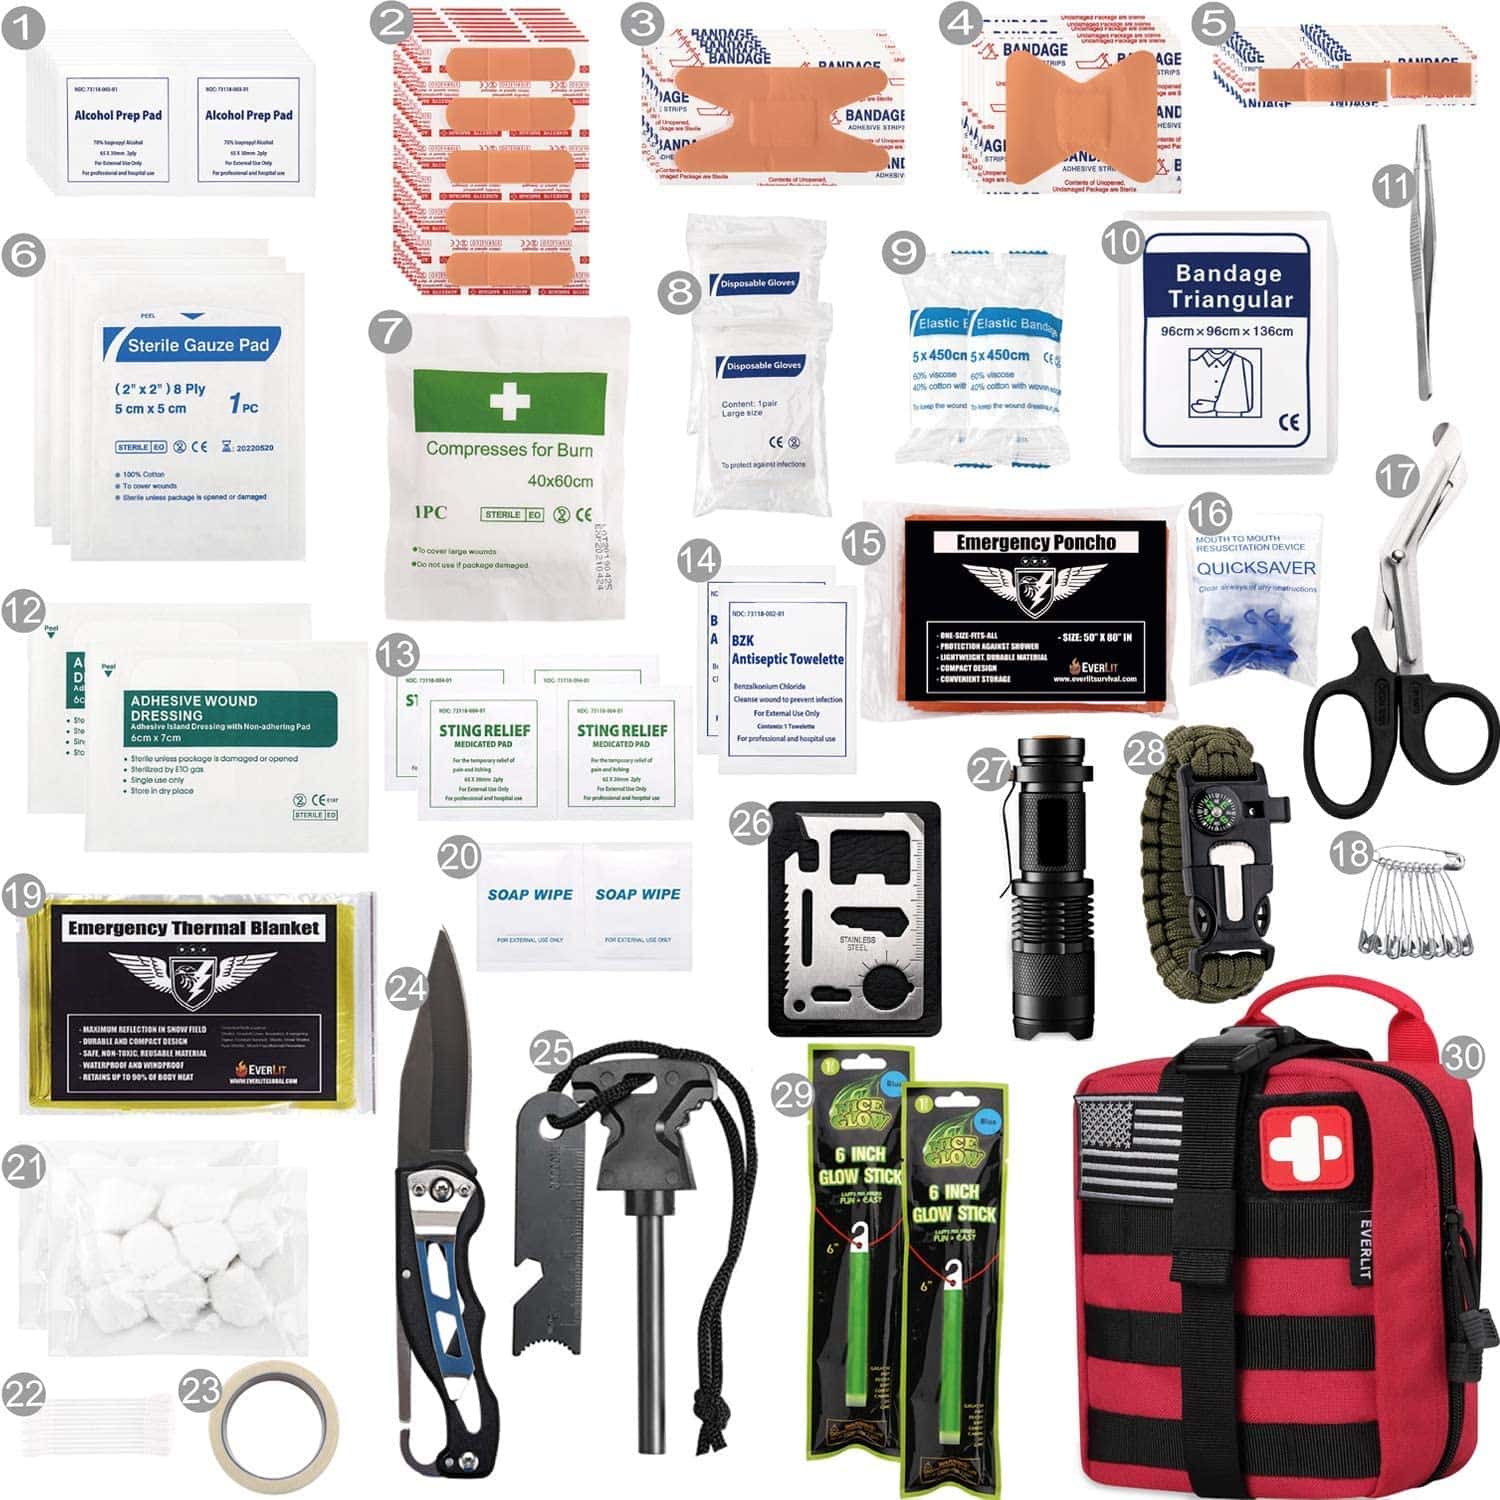 Red Survival First Aid Kit Contains Contains 250 Piece First Aid Kit - 7 